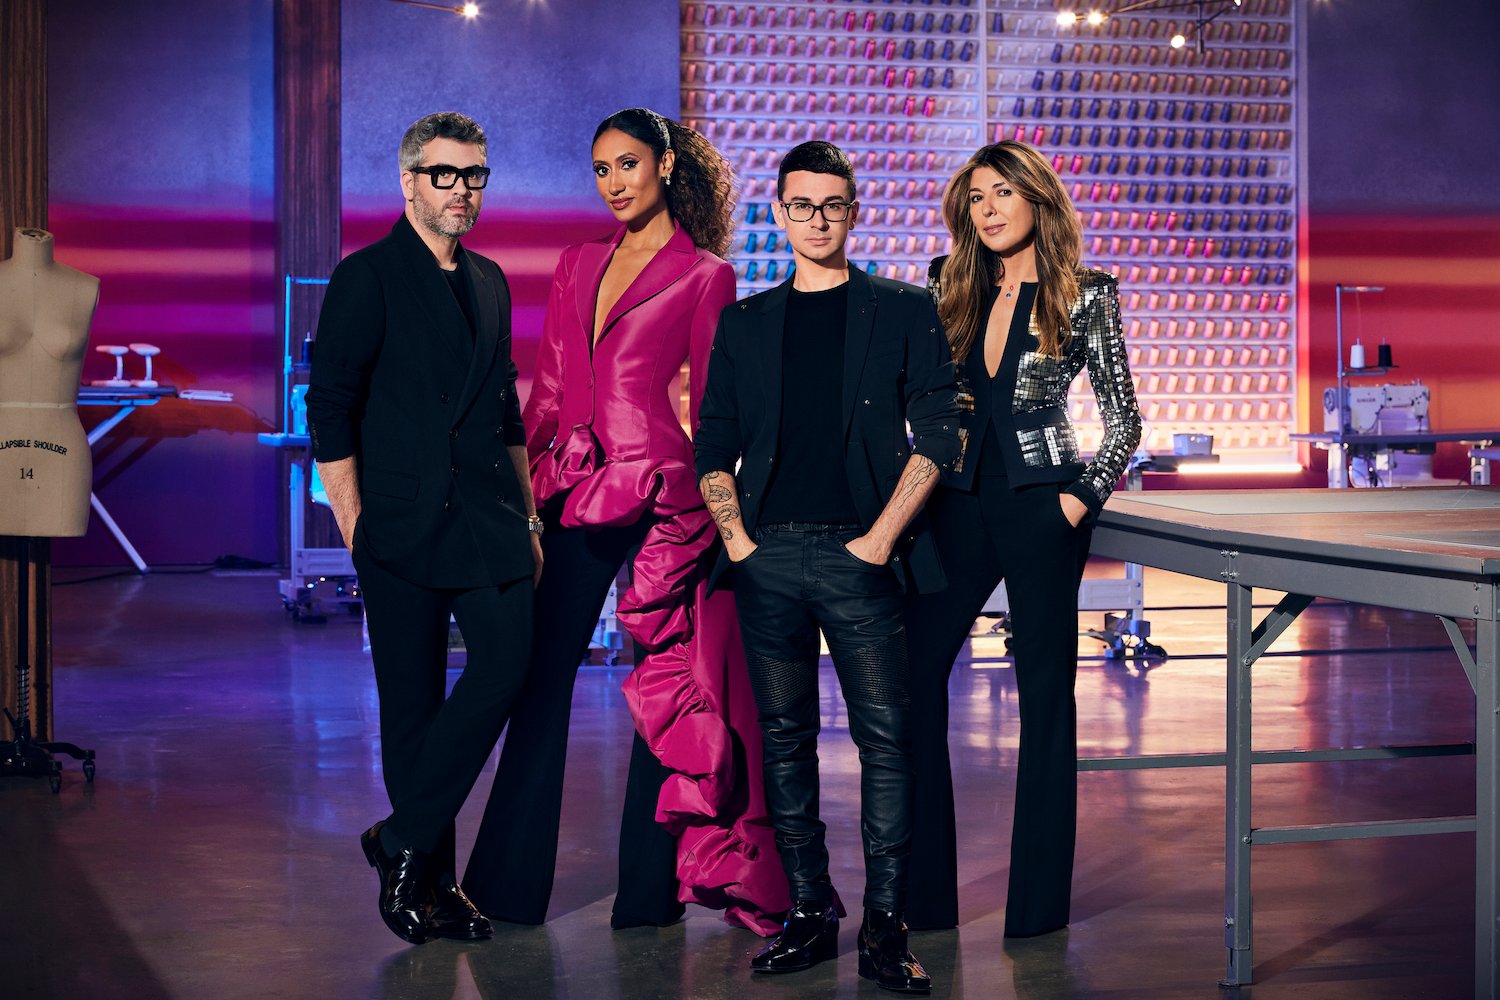 Brandon Maxwell, Elaine Welteroth, Christian Siriano, and Nina Garcia in the 'Project Runway' workroom for Season 19 cast photo